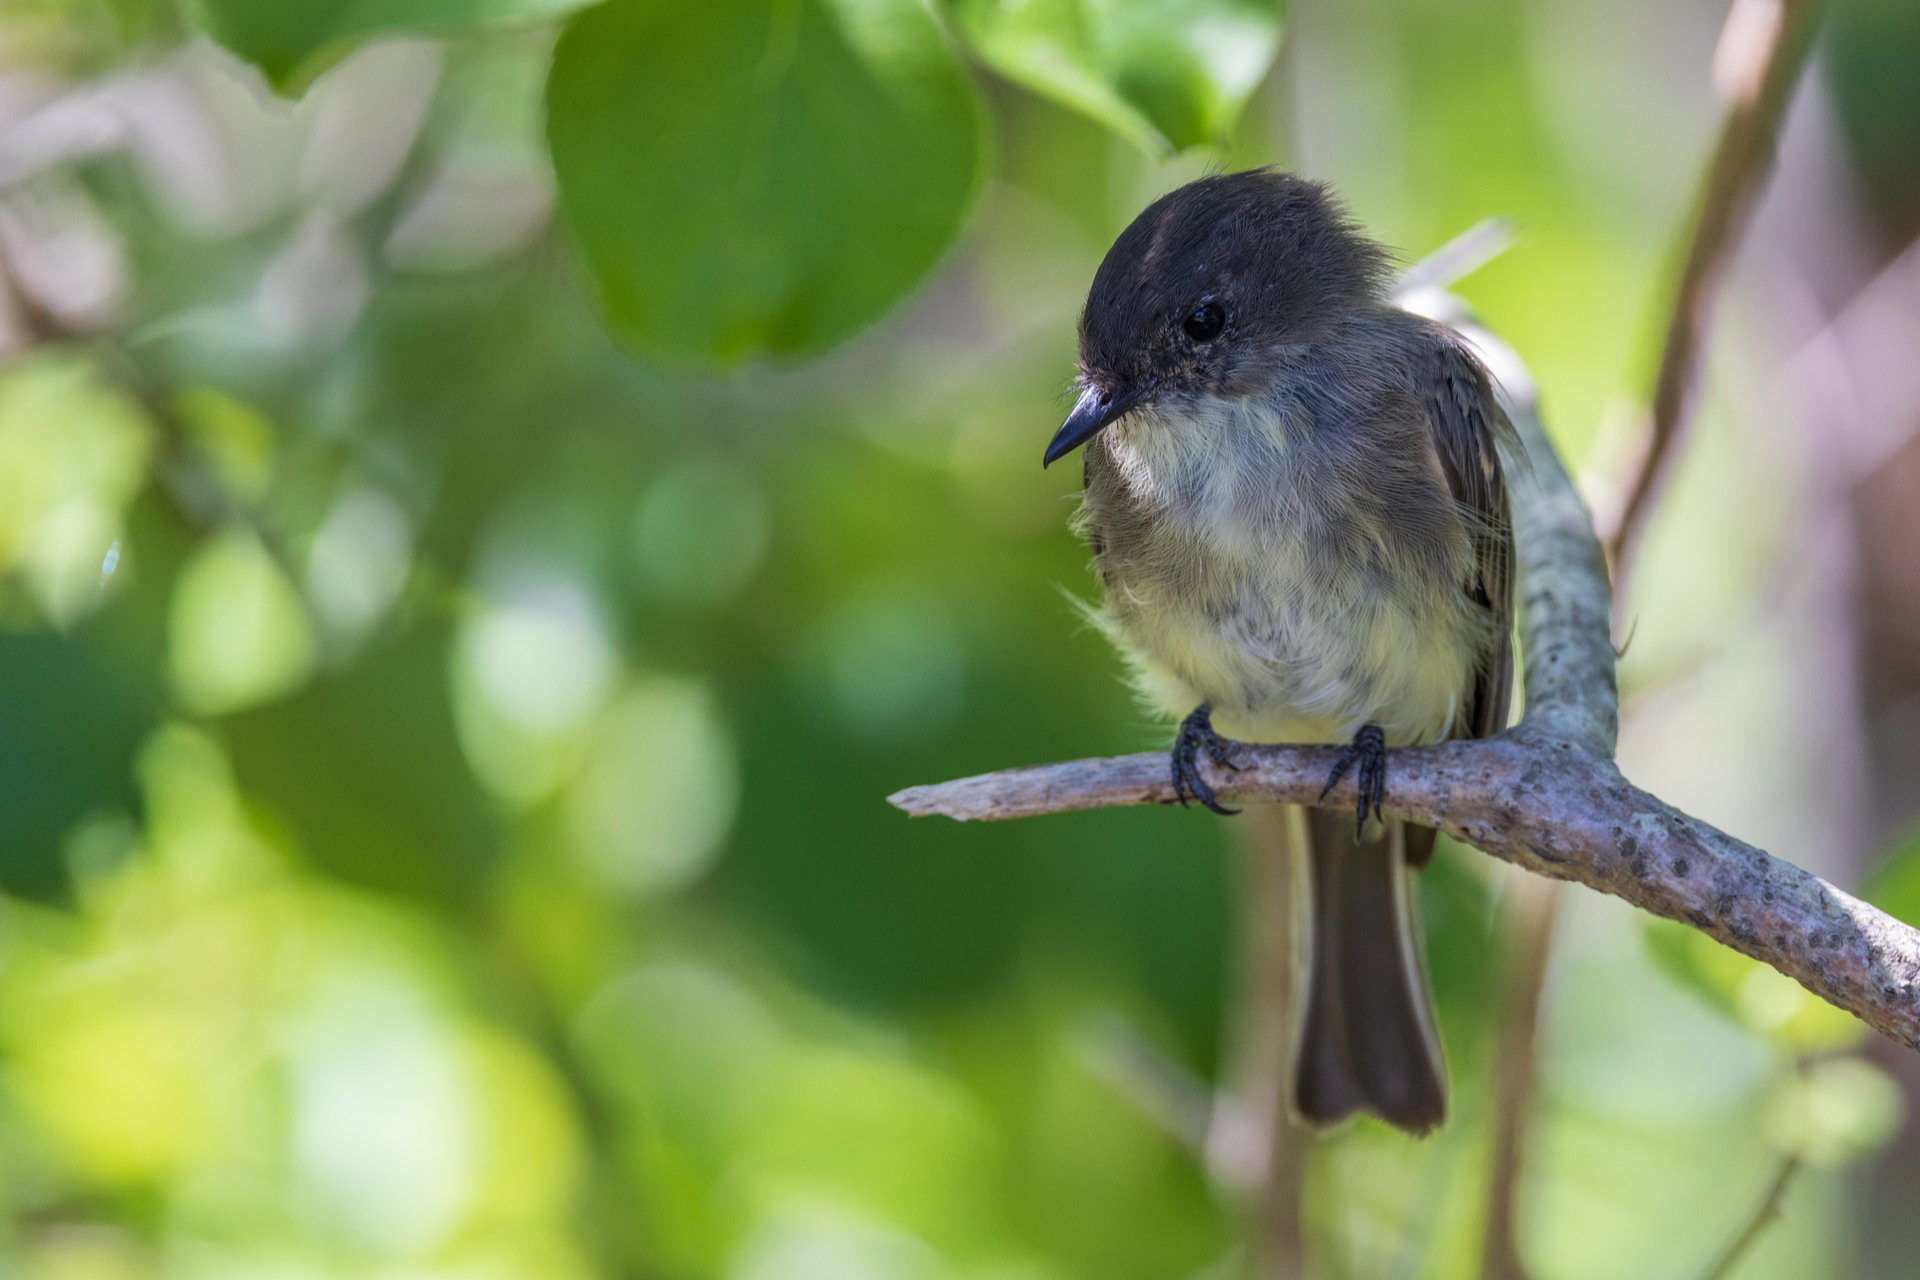 Eastern Phoebe perched on branch